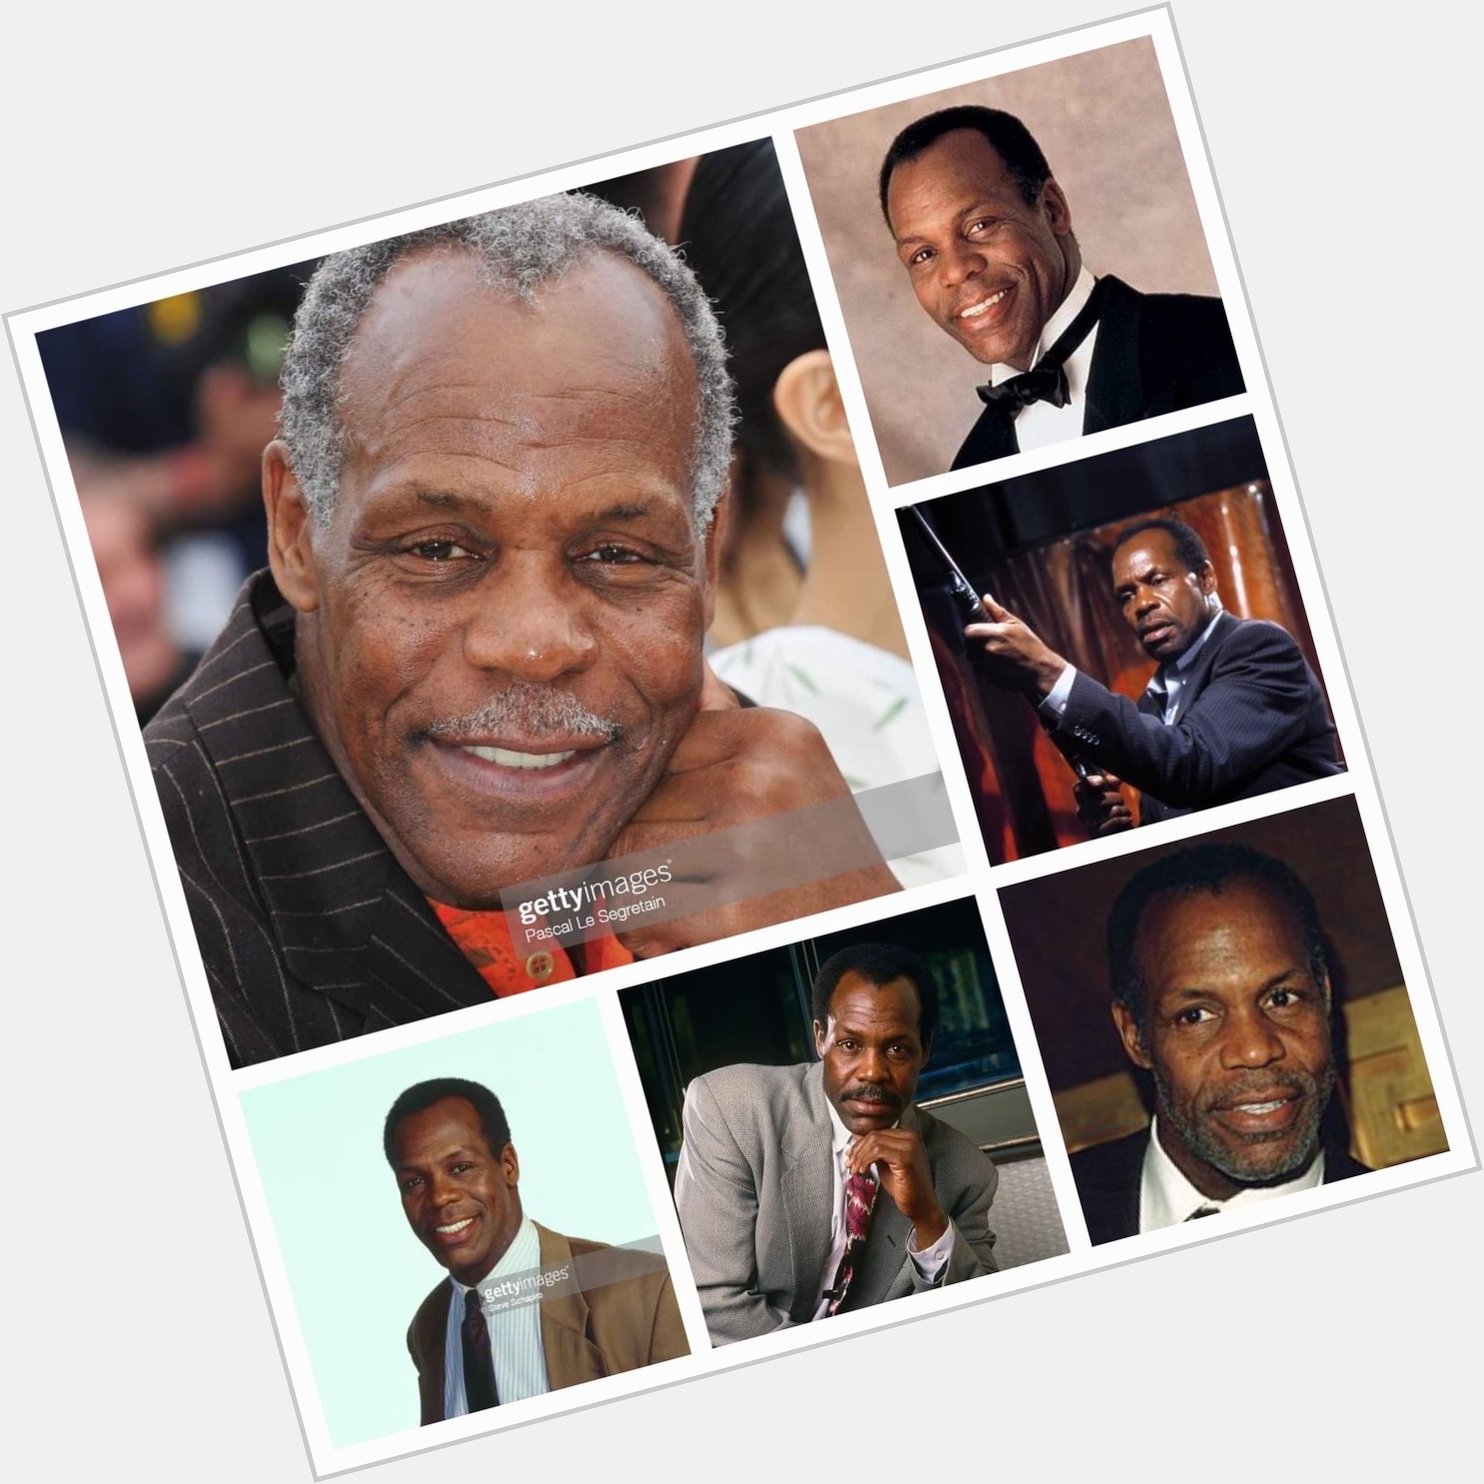 Happy 76th birthday Danny Glover!
The American icon and legend. 